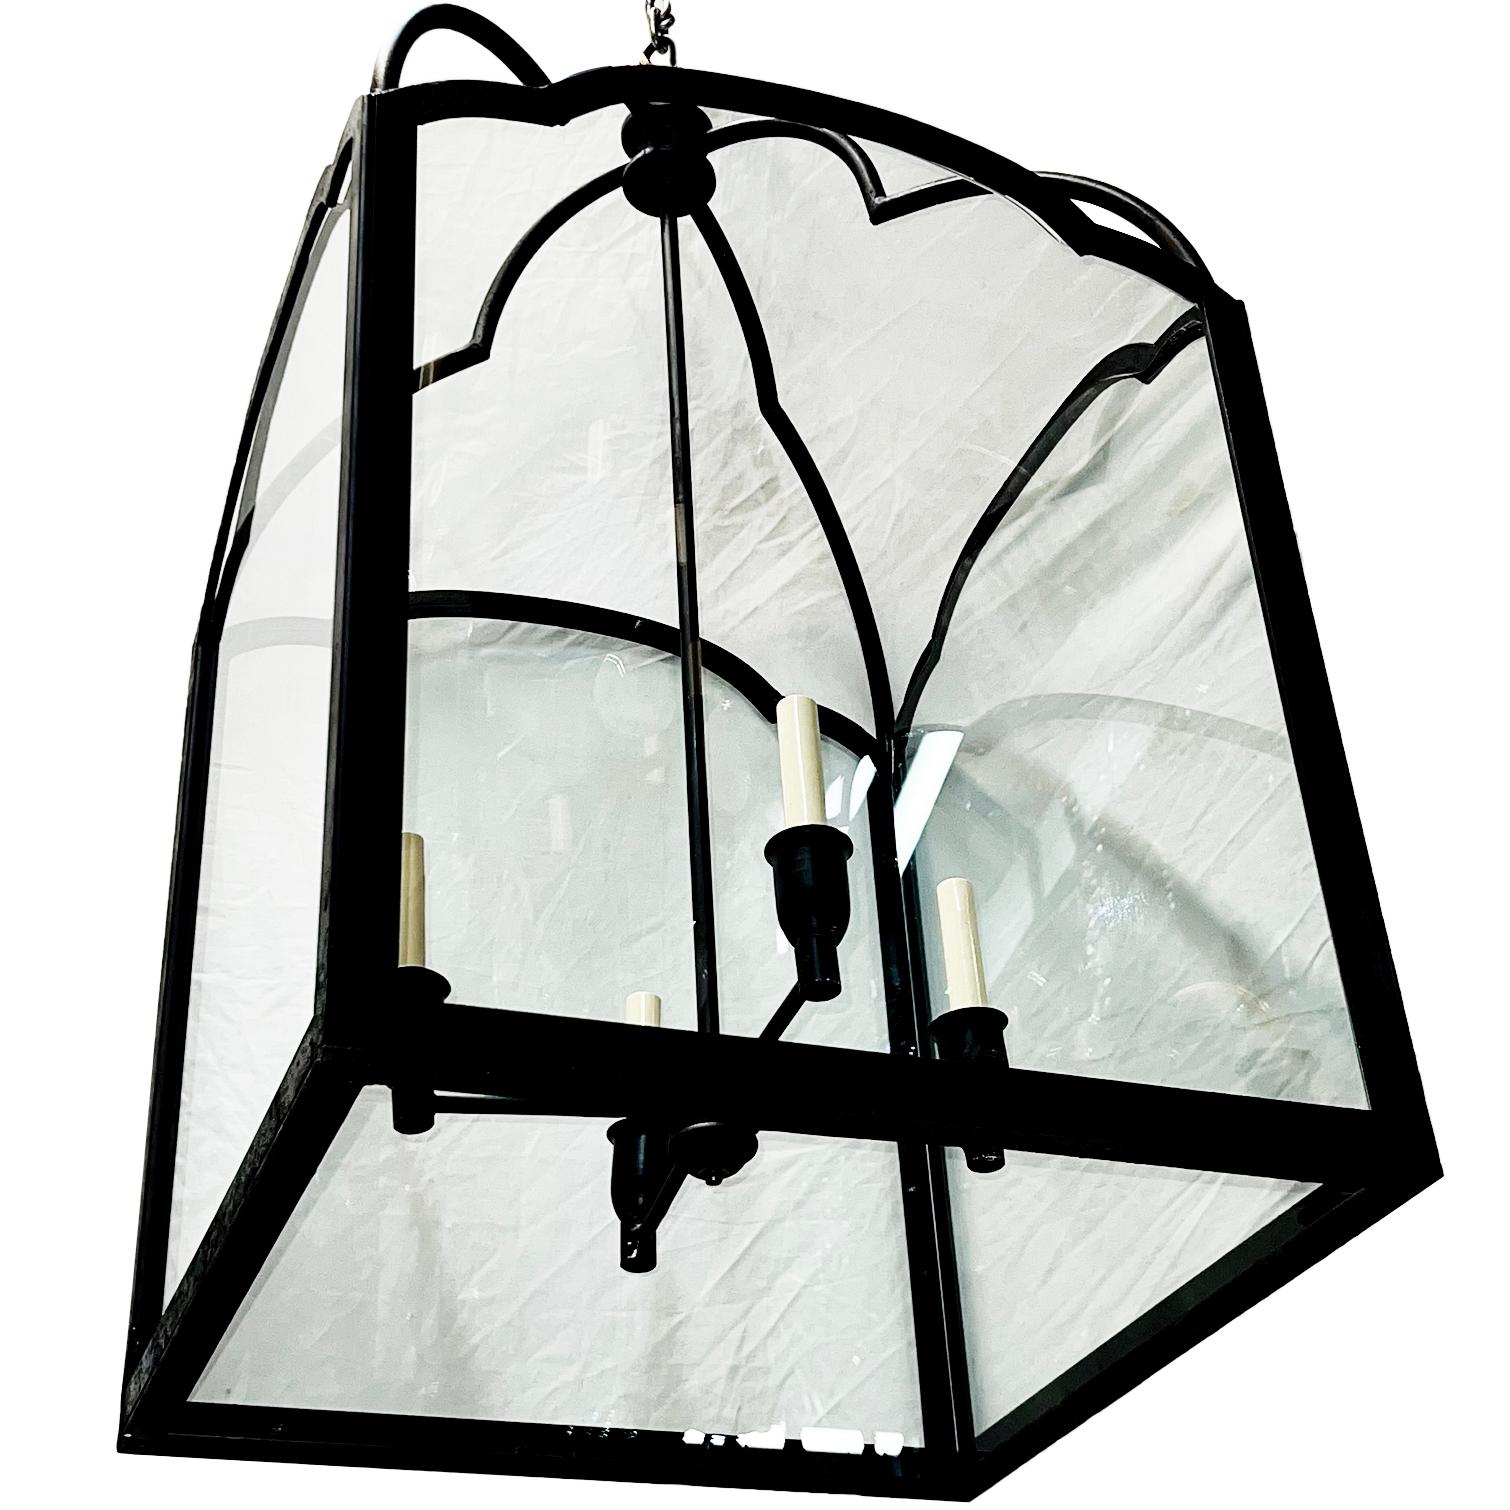 A circa 1950's French wrought iron lantern with original patina and 4 candelabra interior lights.

Measurements:
Drop: 29